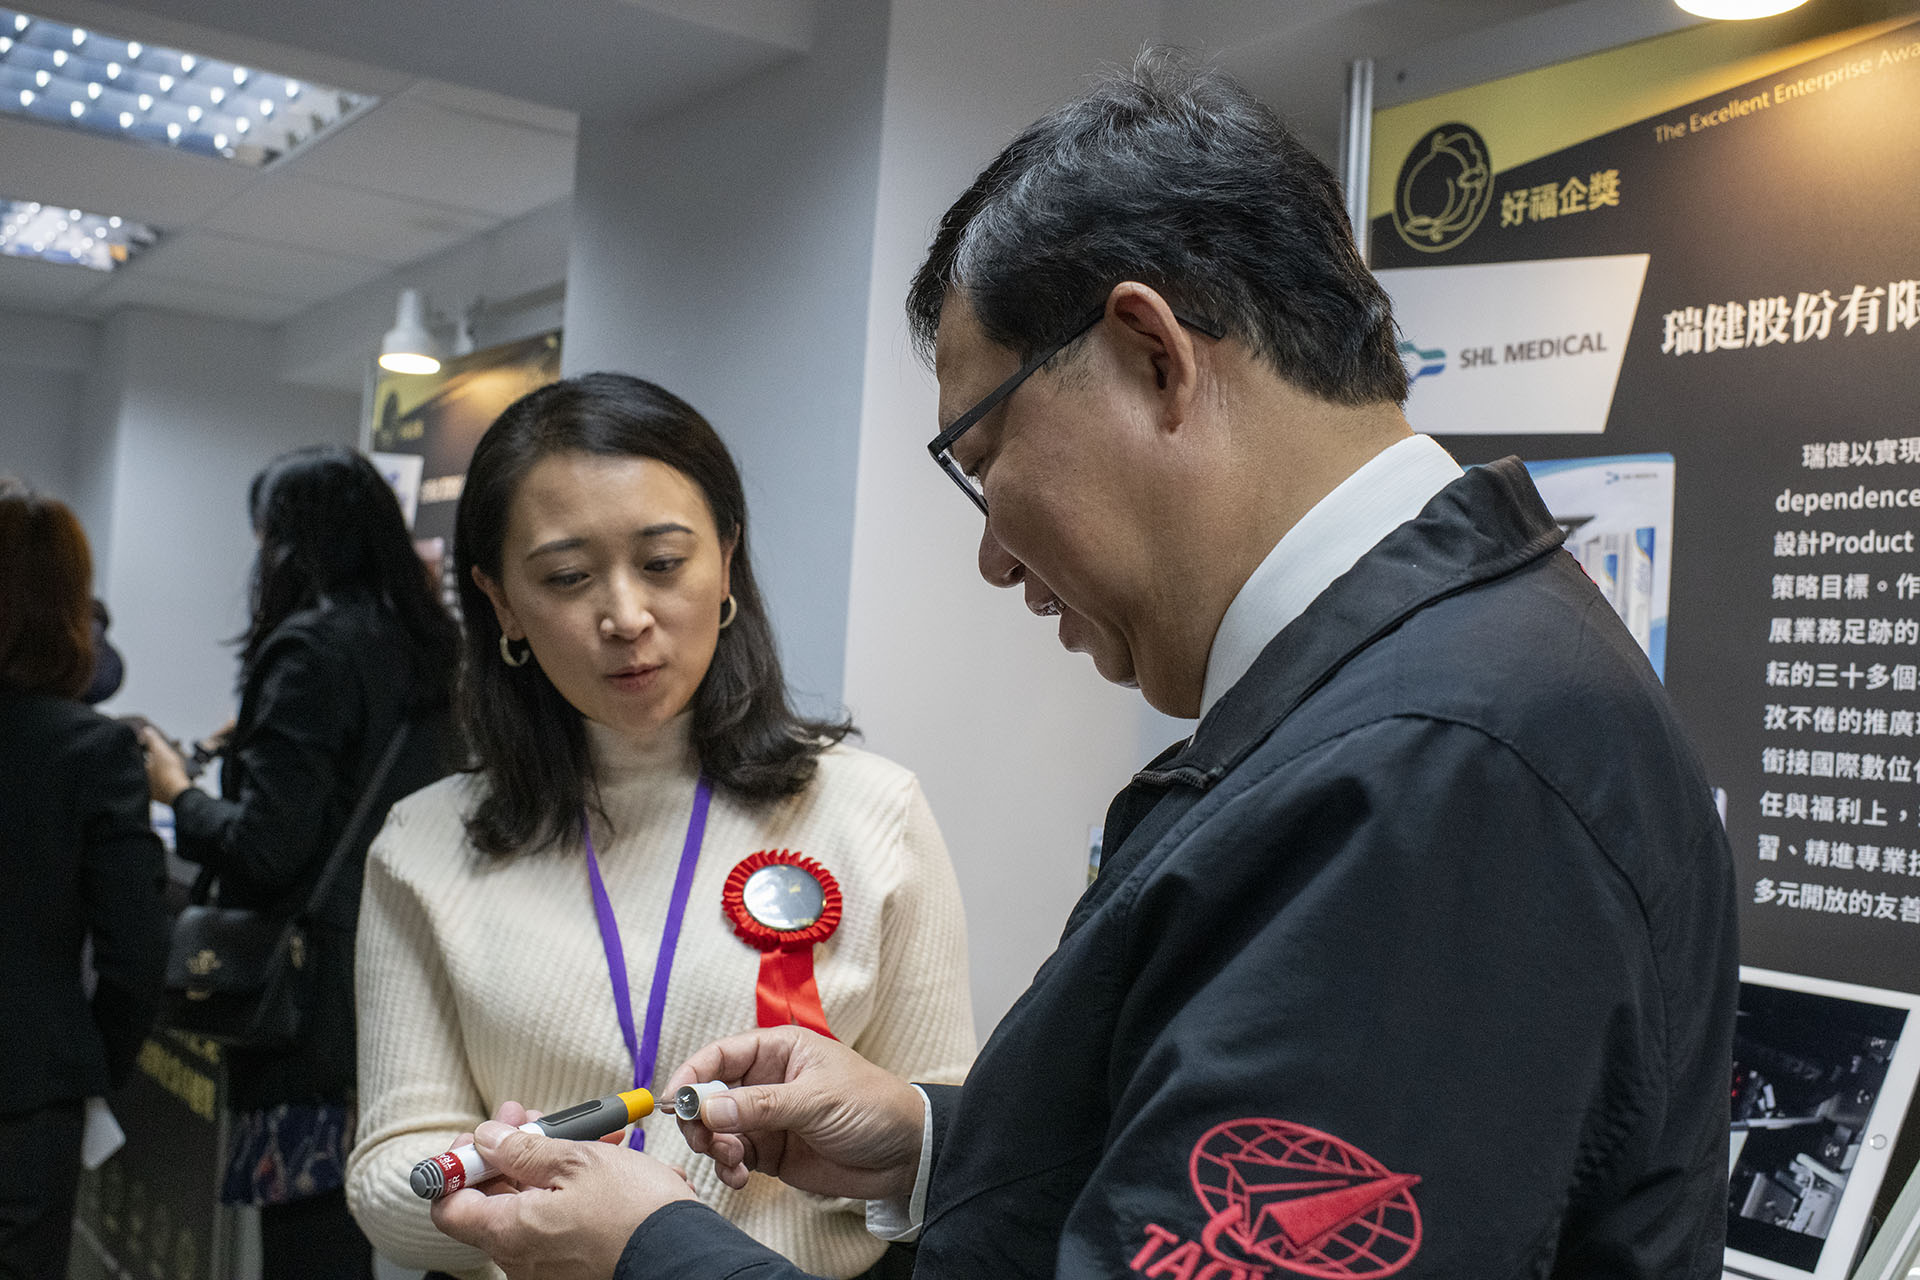 Lillian Yao (Senior Director of Human Resources), on behalf of SHL Medical, explaining the autoinjector components to Taoyuan mayor